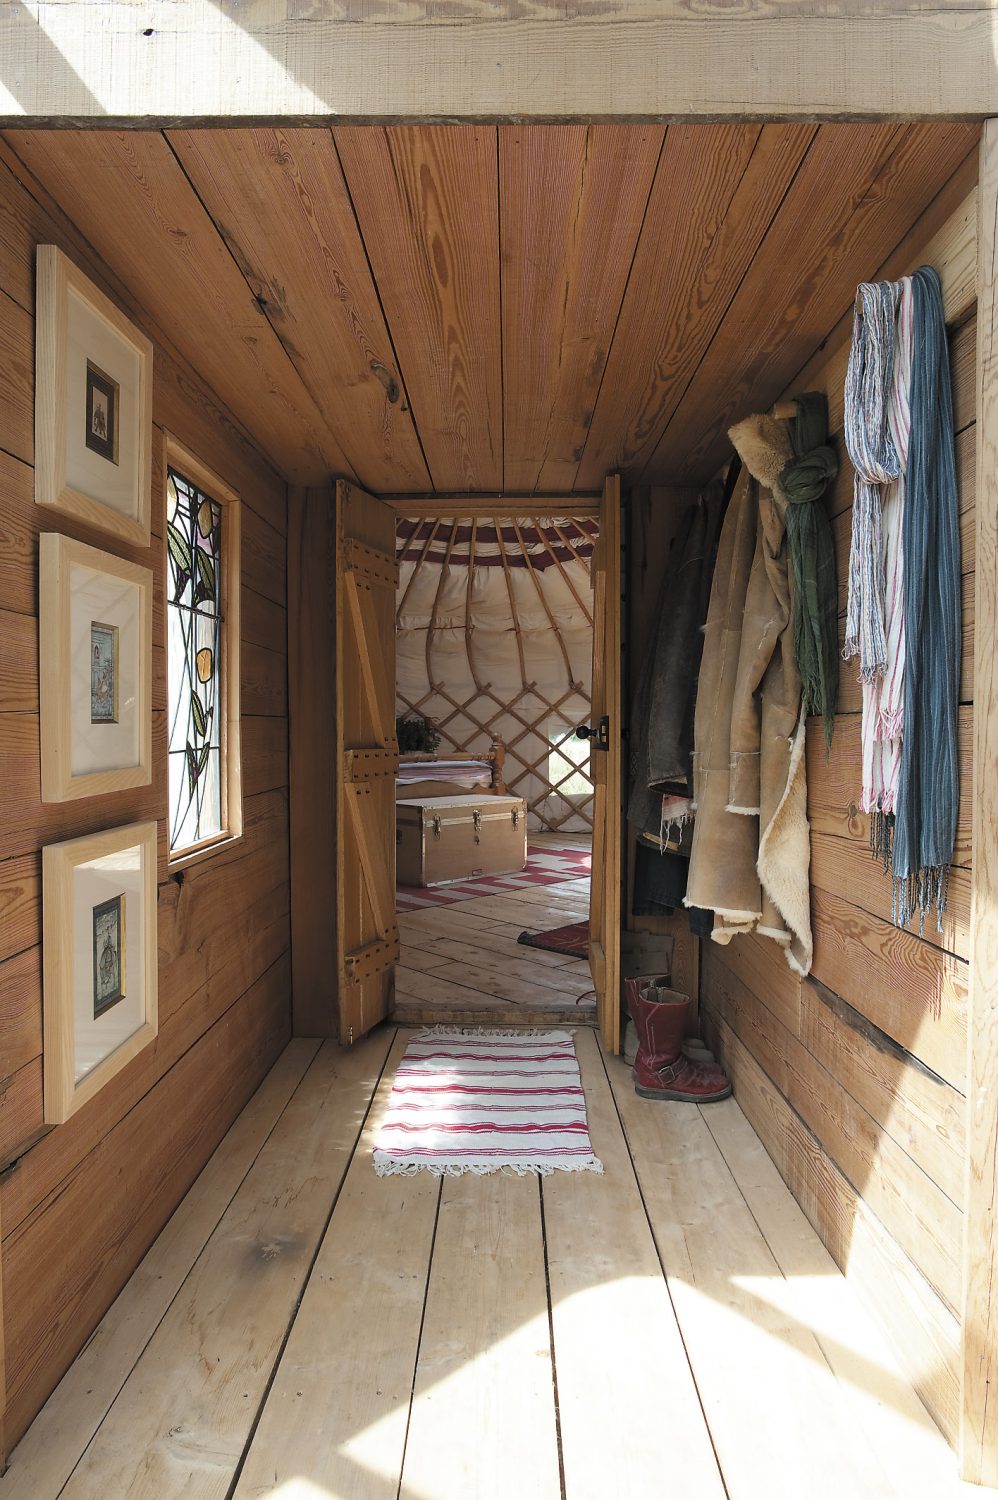 The small passage that connects the yurt to the conservatory is clad in reclaimed timber from Symonds Salvage in Bethersden